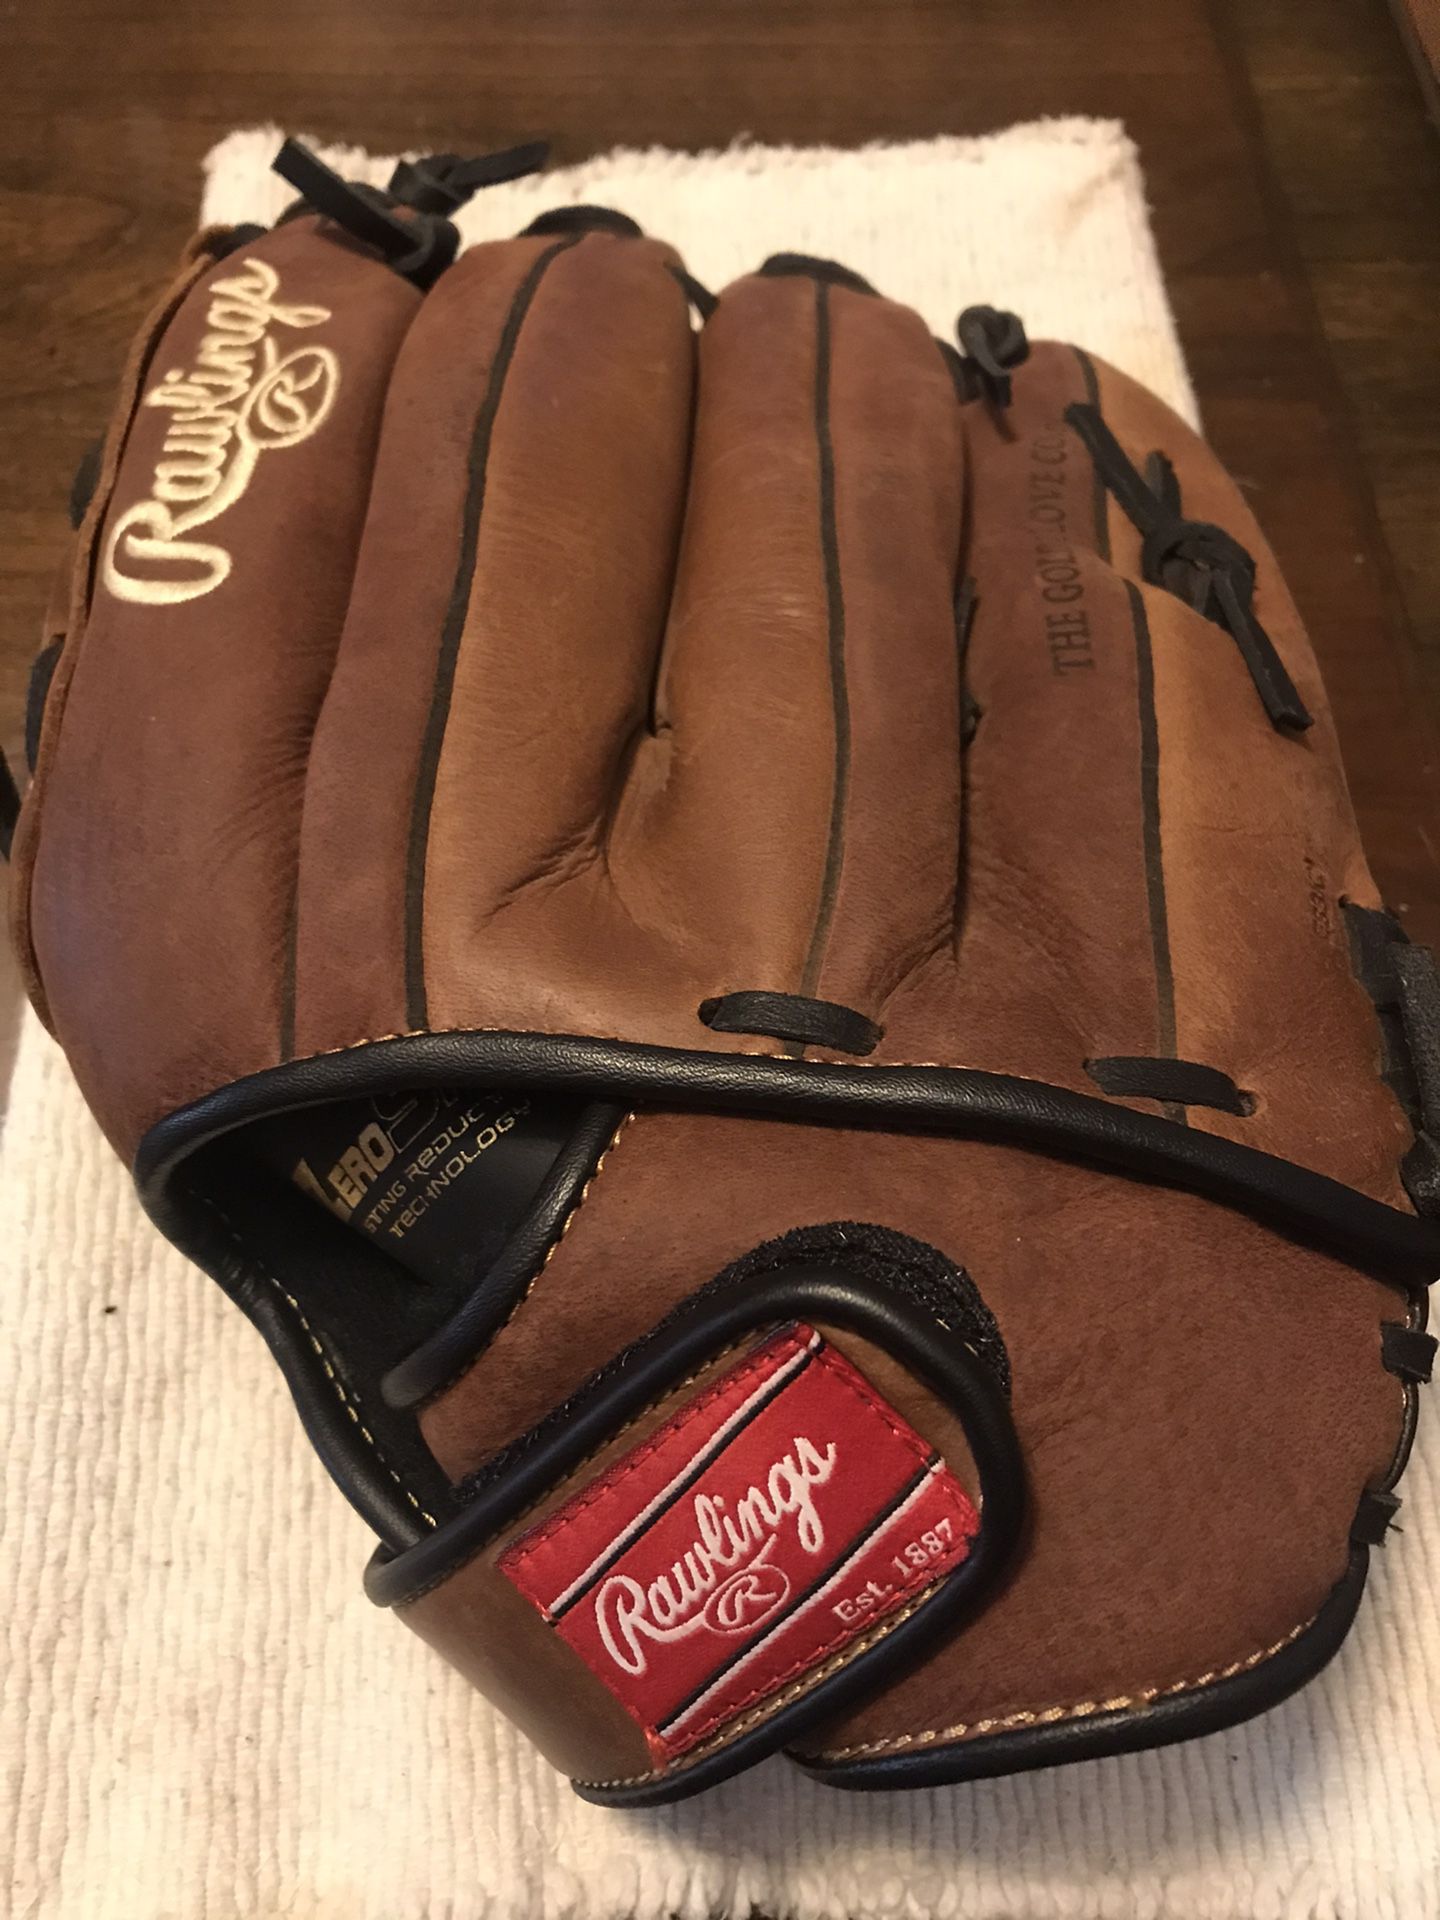 Brand new right handed baseball glove in excellent condition